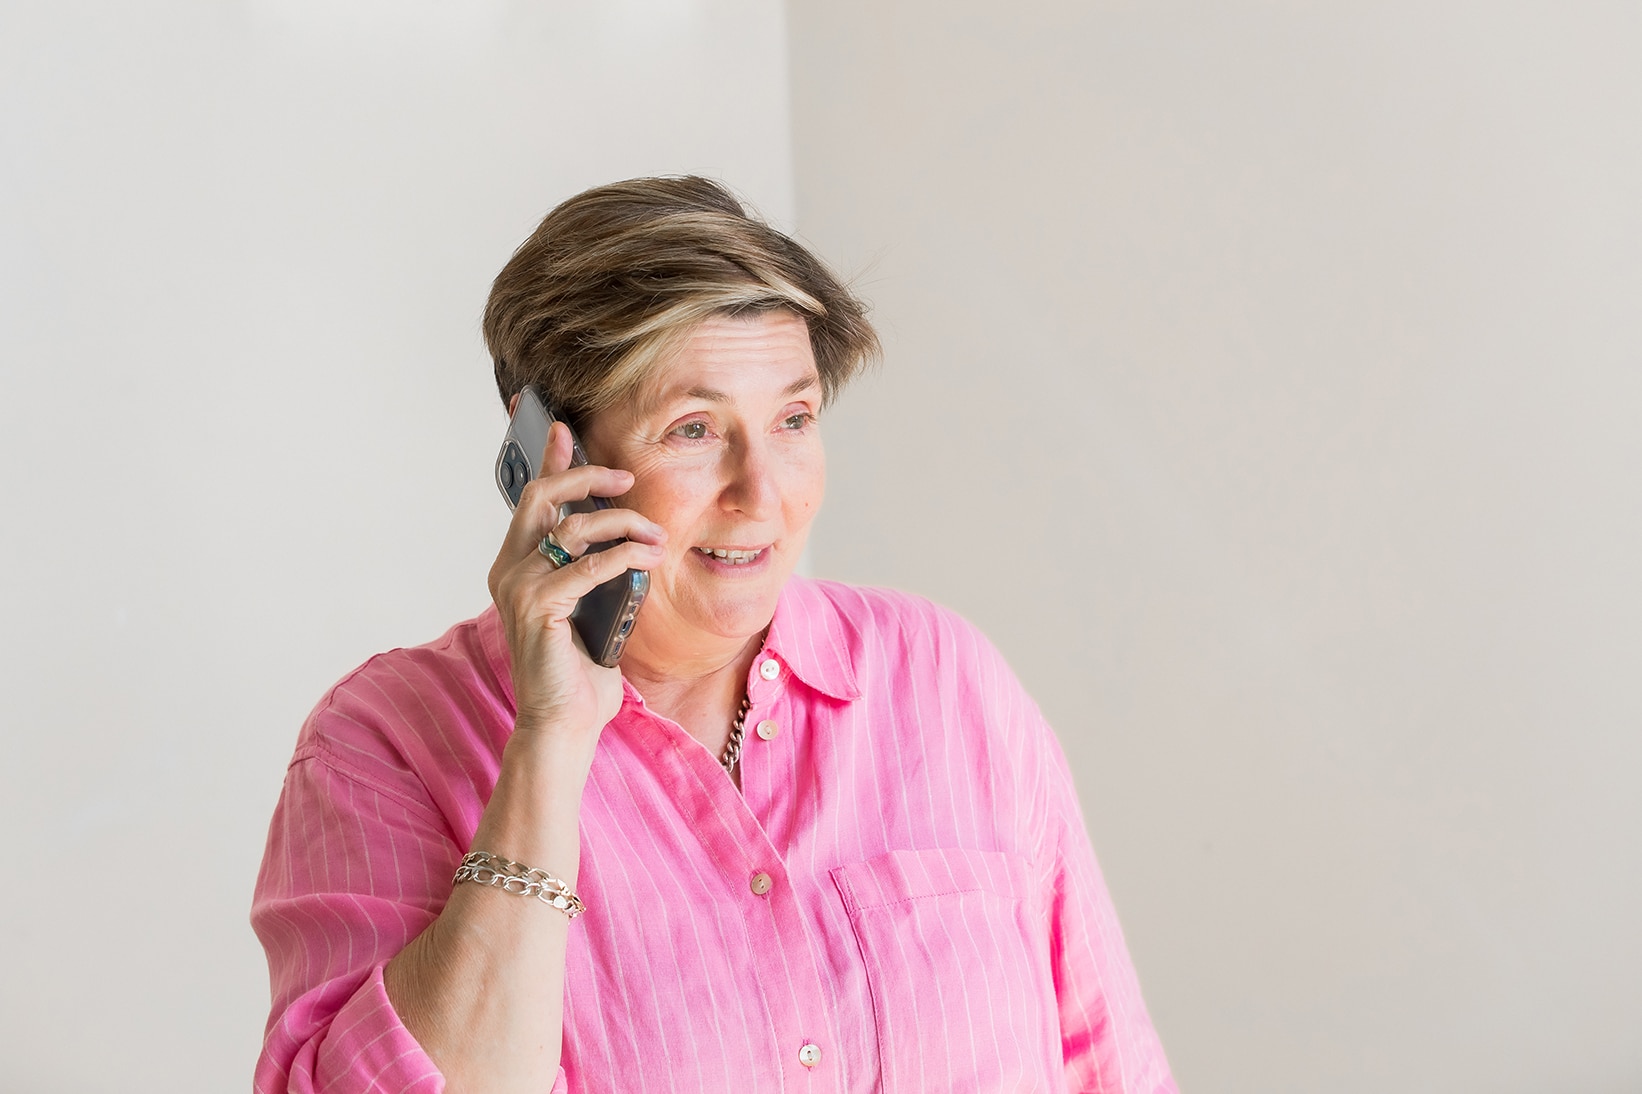 A woman wearing a pink shirt talking on the phone